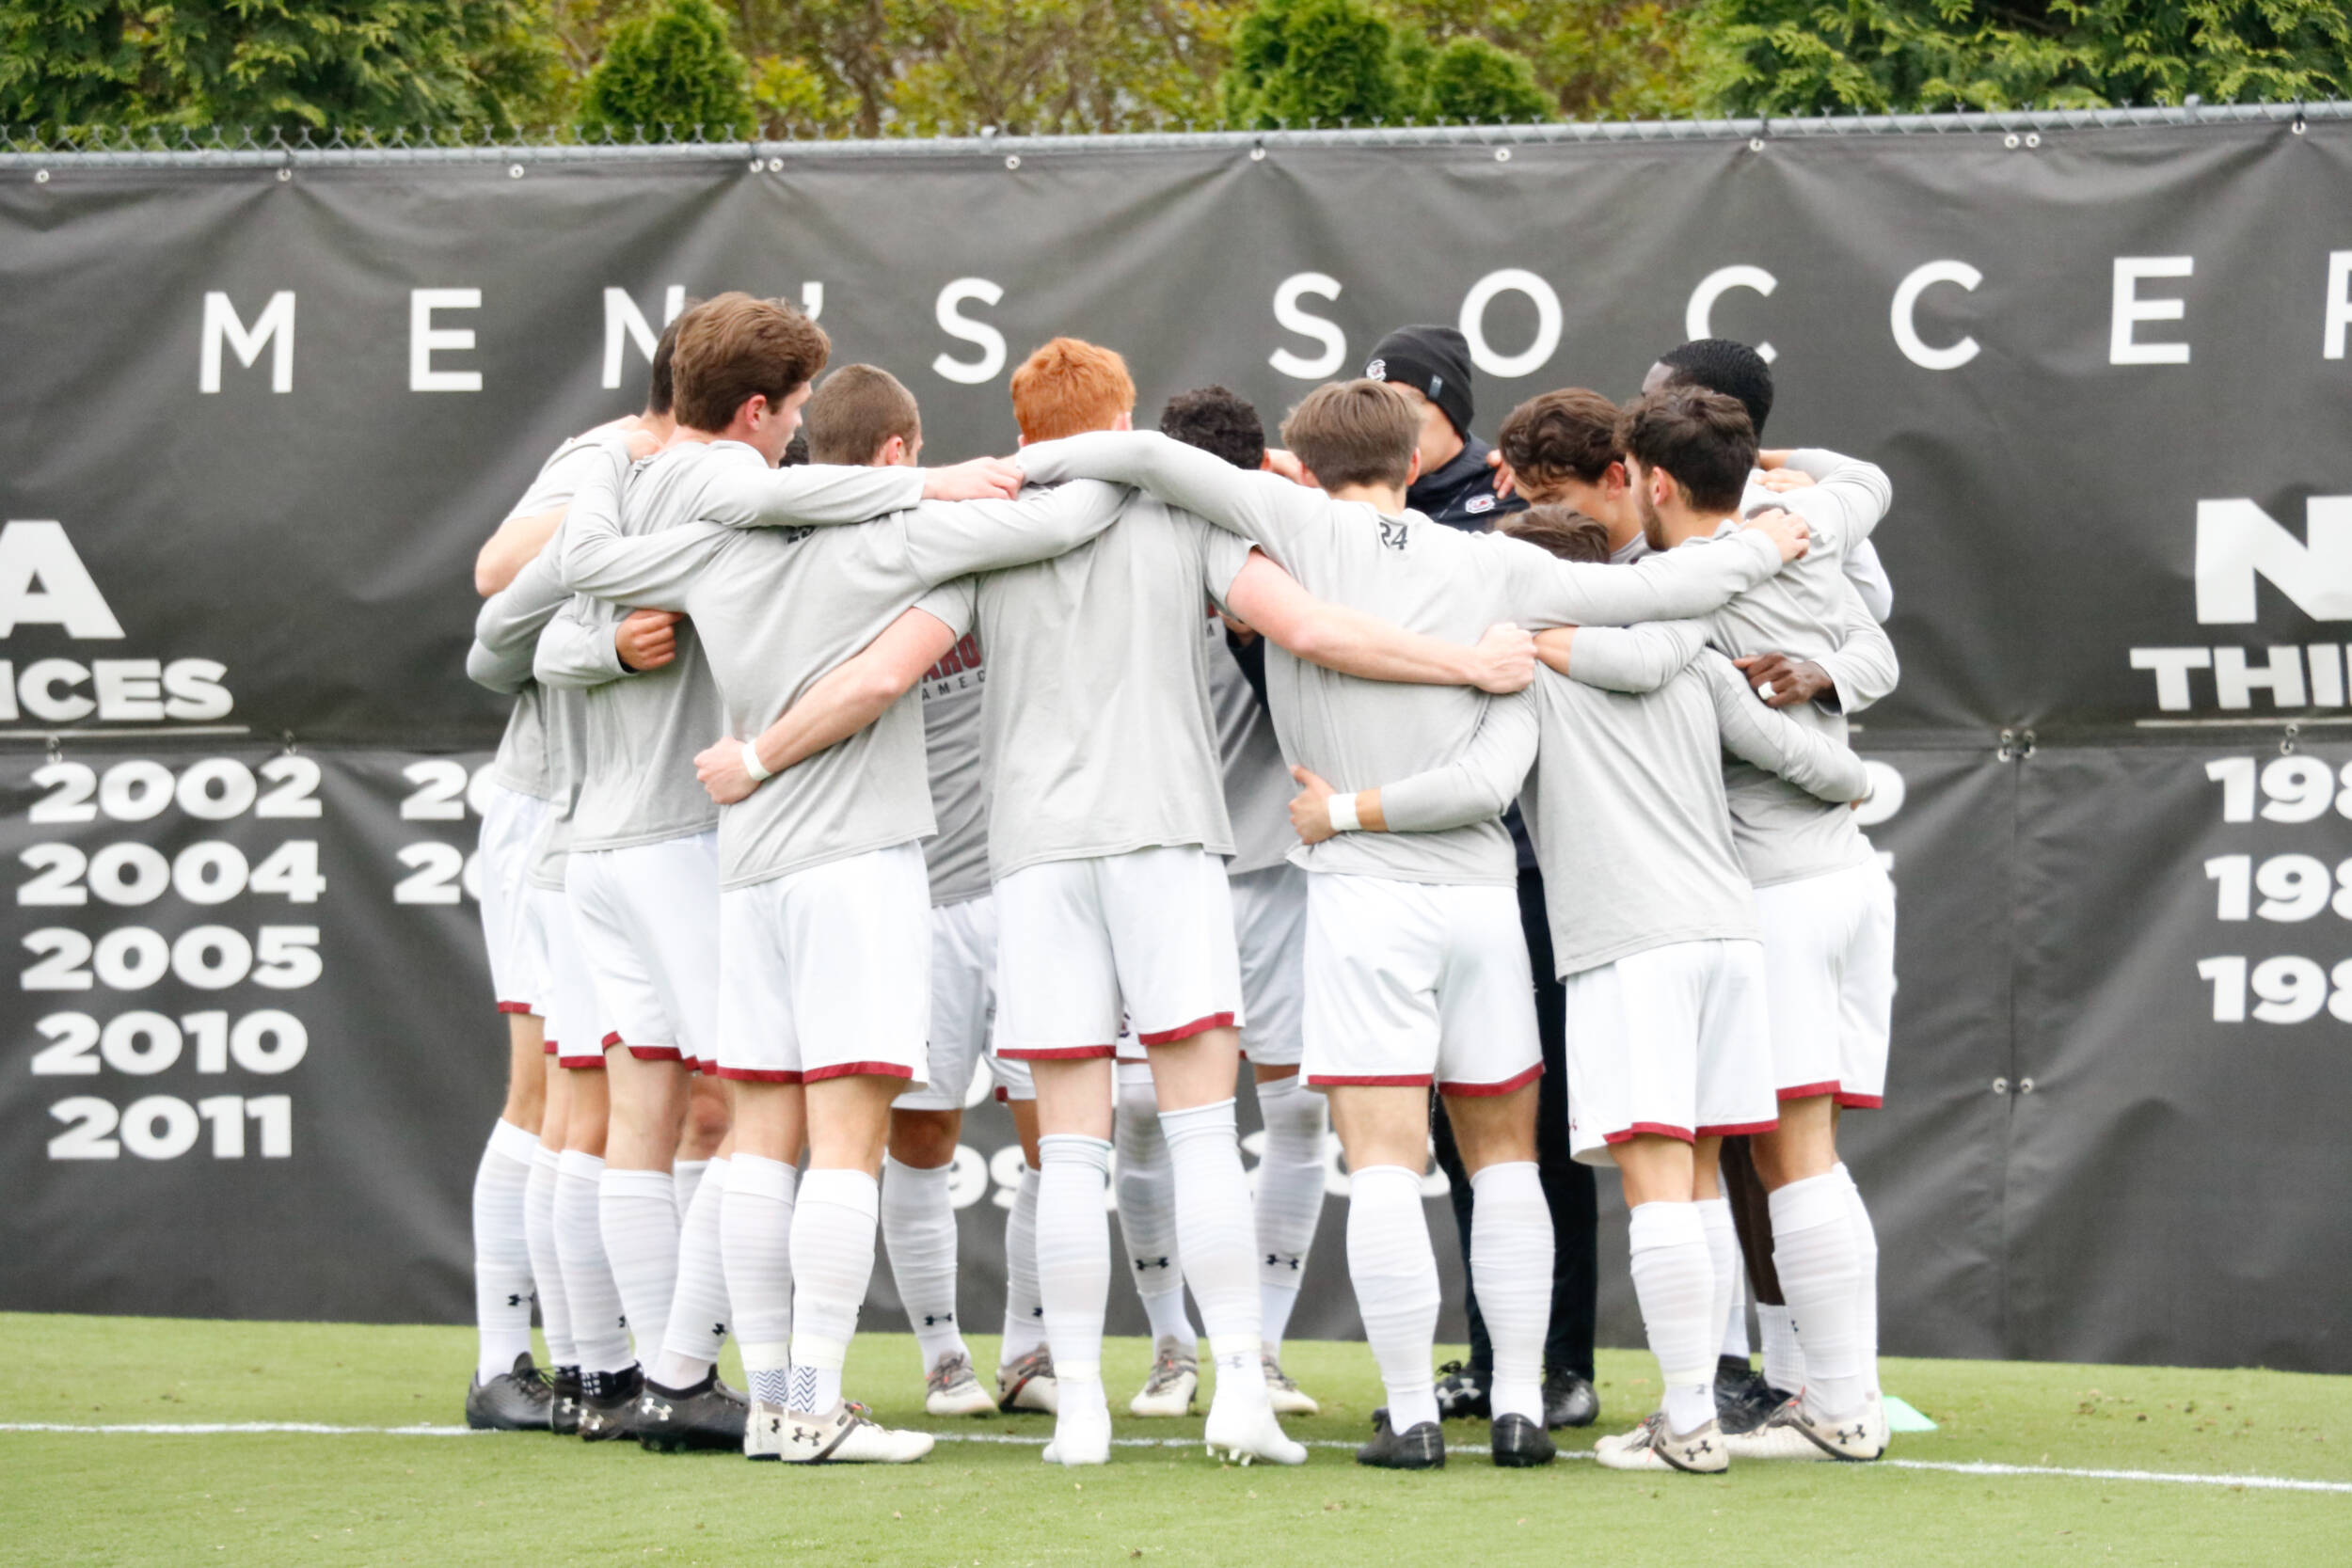 Men's Soccer Welcomes 18 Newcomers for Upcoming Season